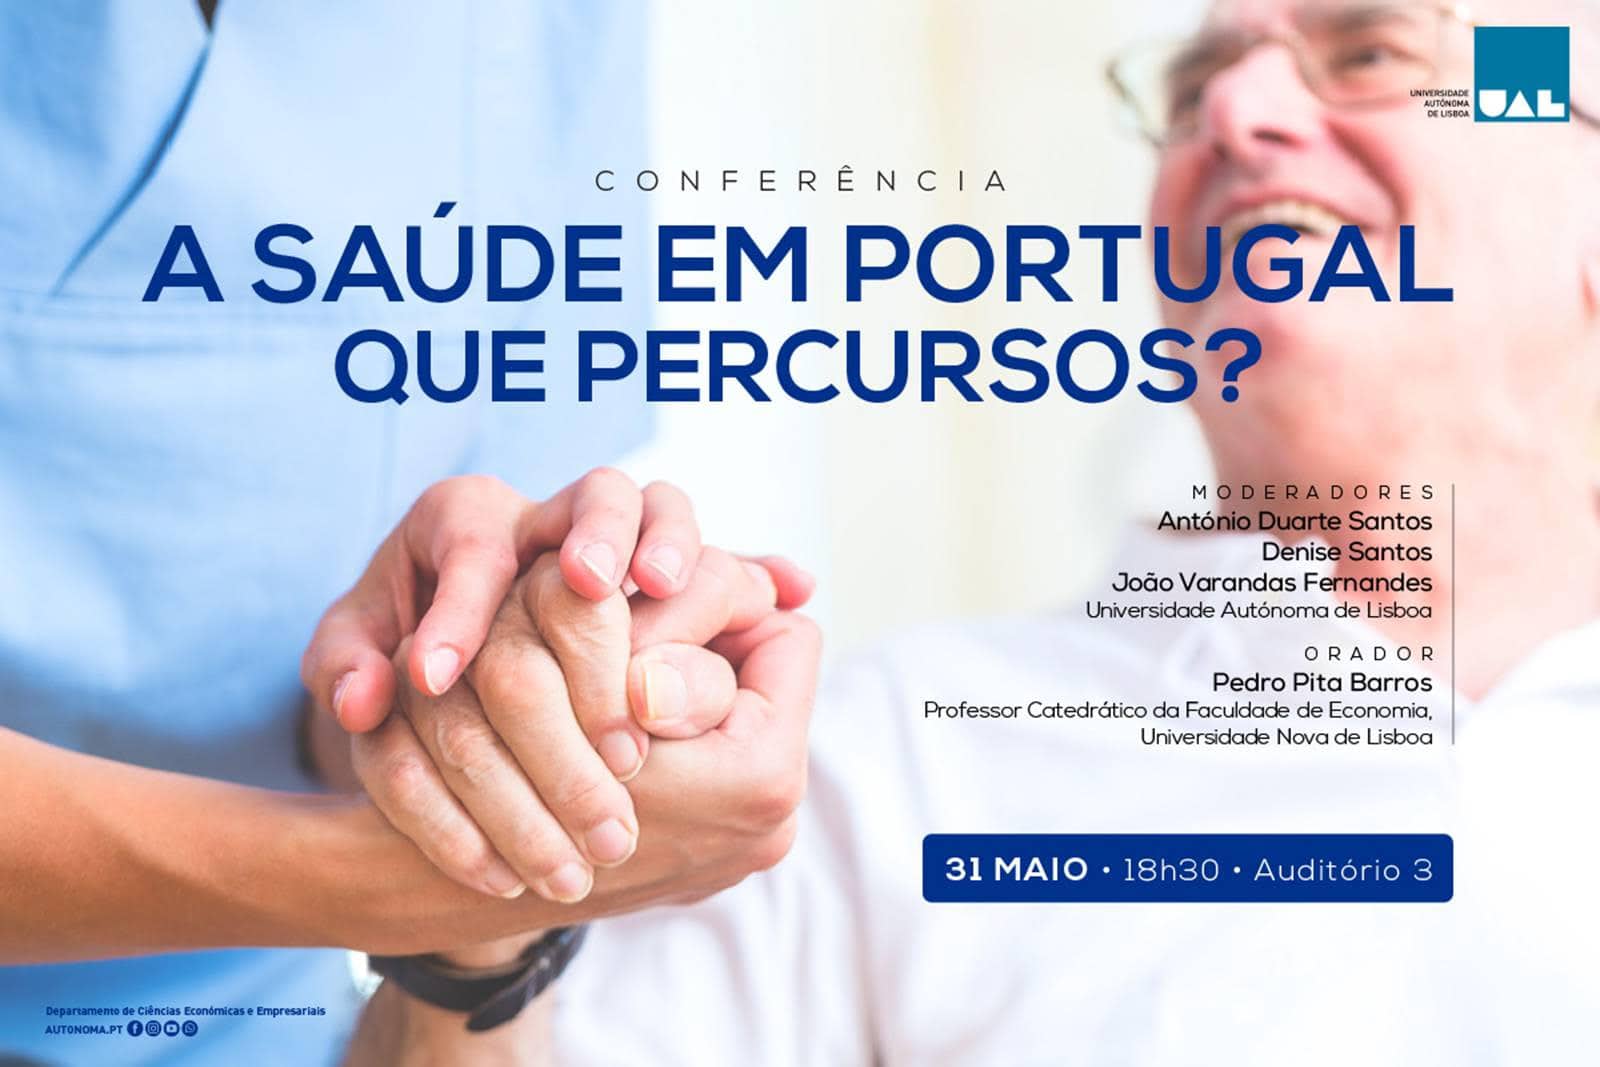 Health in Portugal: Which Paths?